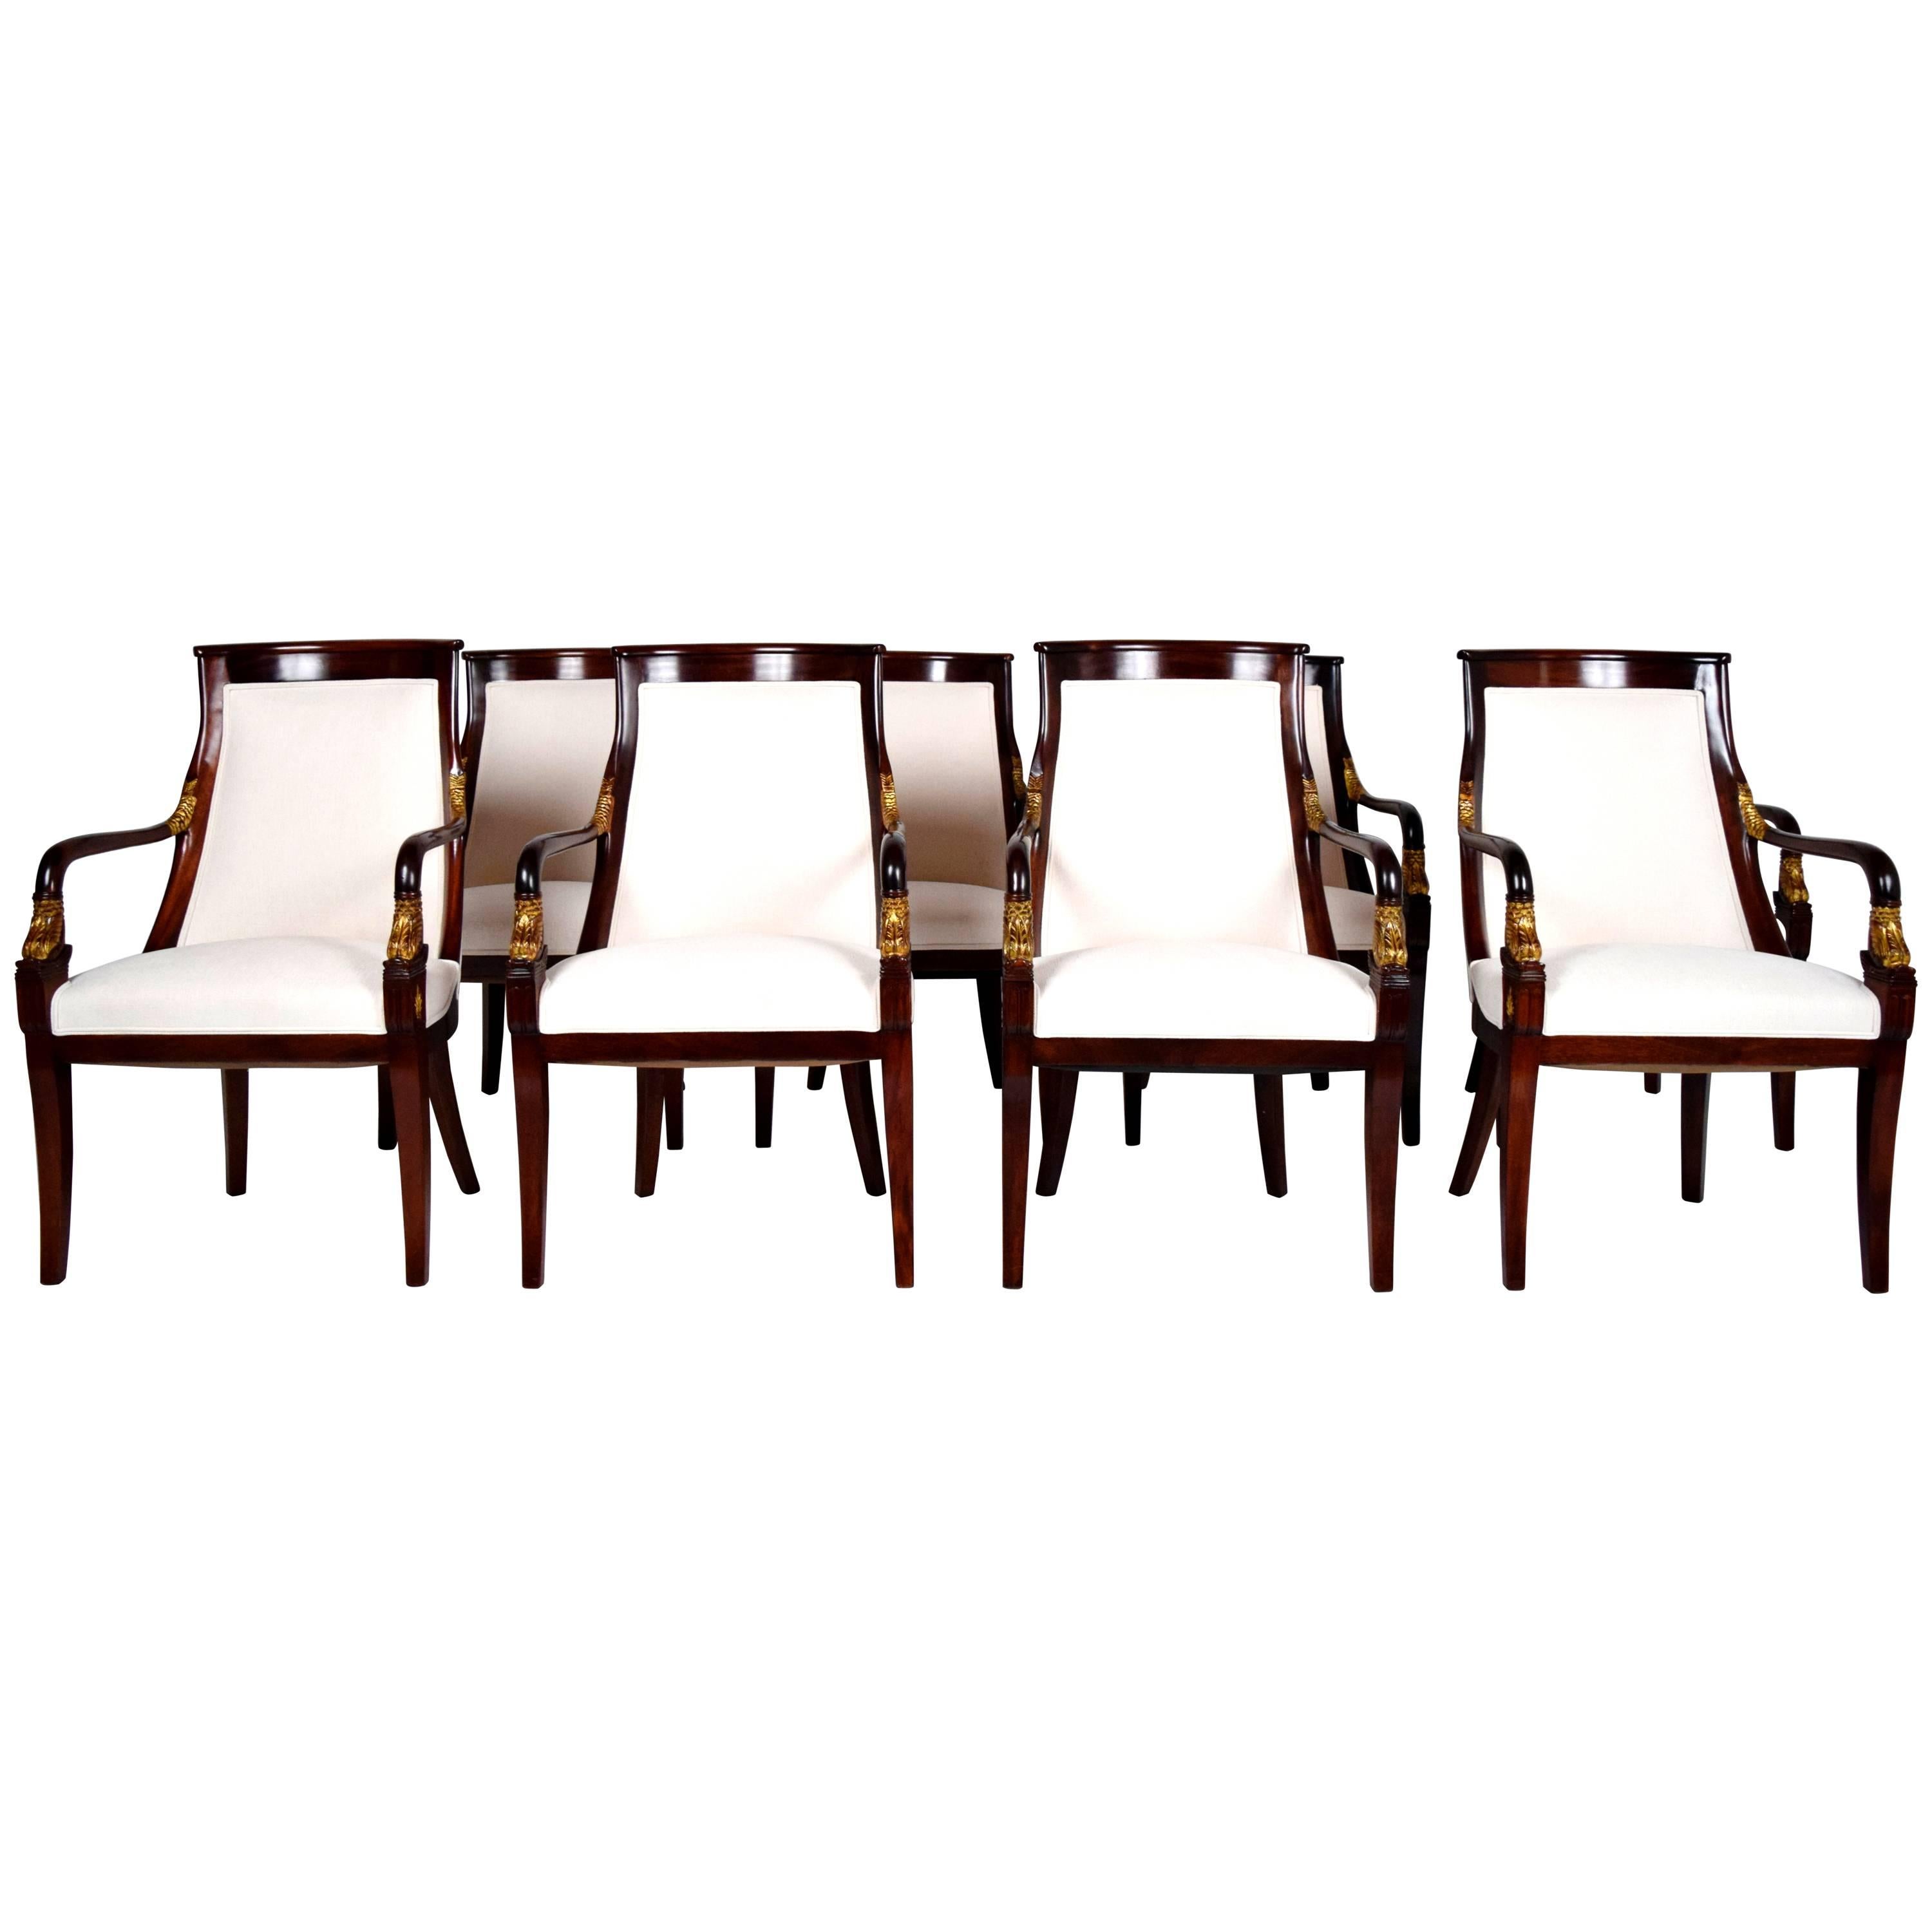 Set of Eight Empire-Style Mahogany Dining Chairs